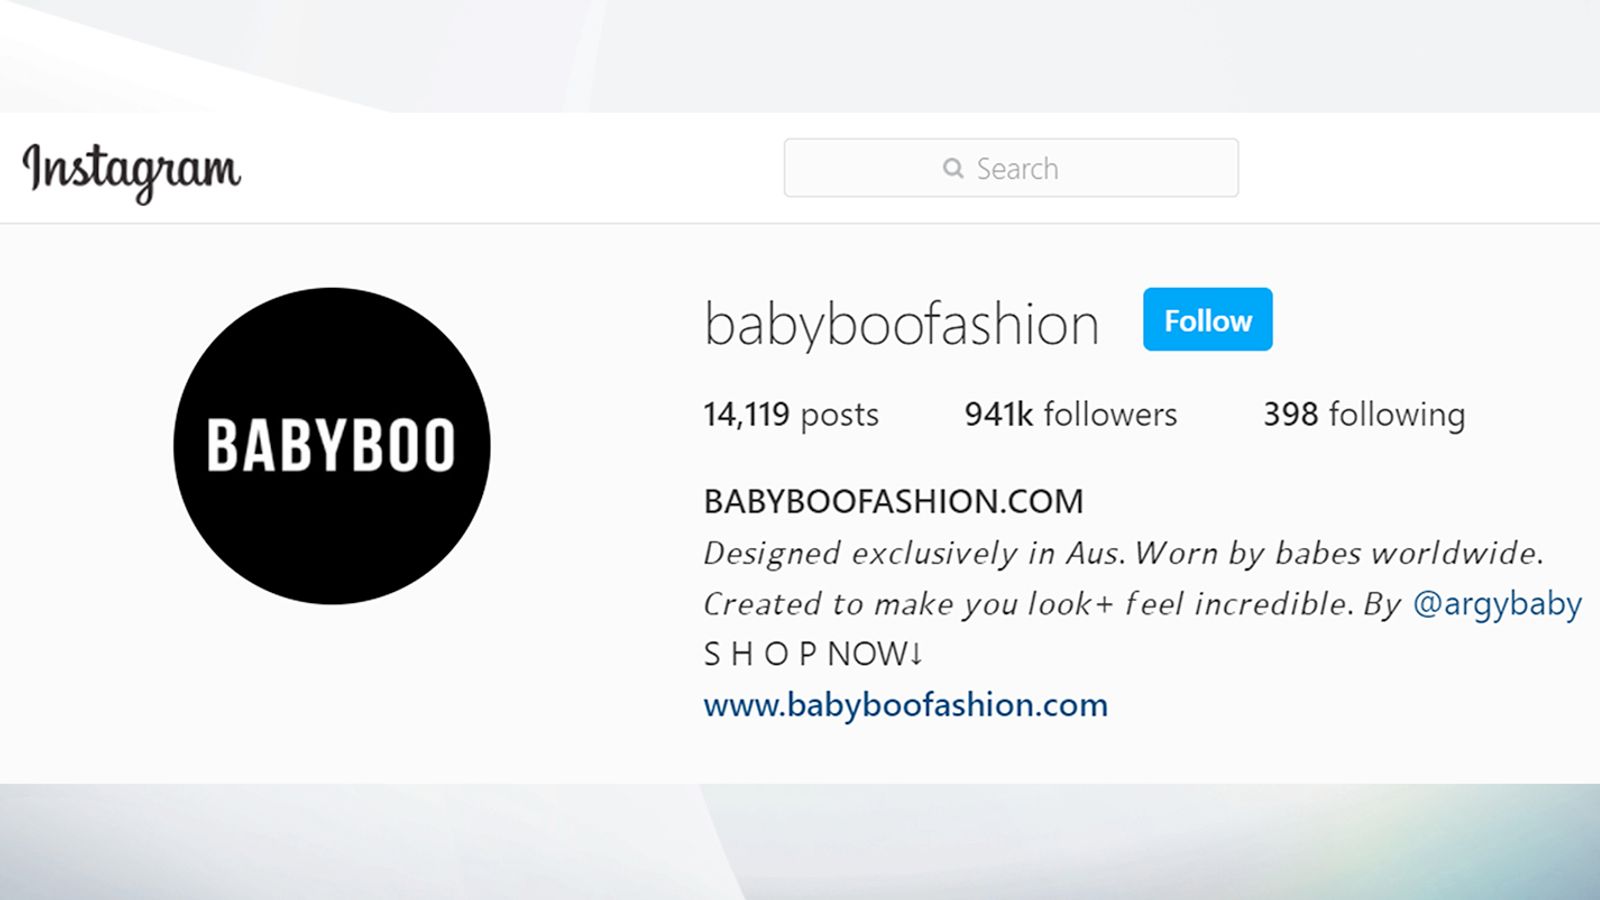 Babyboo Instagram advert on Halloween fashion banned for